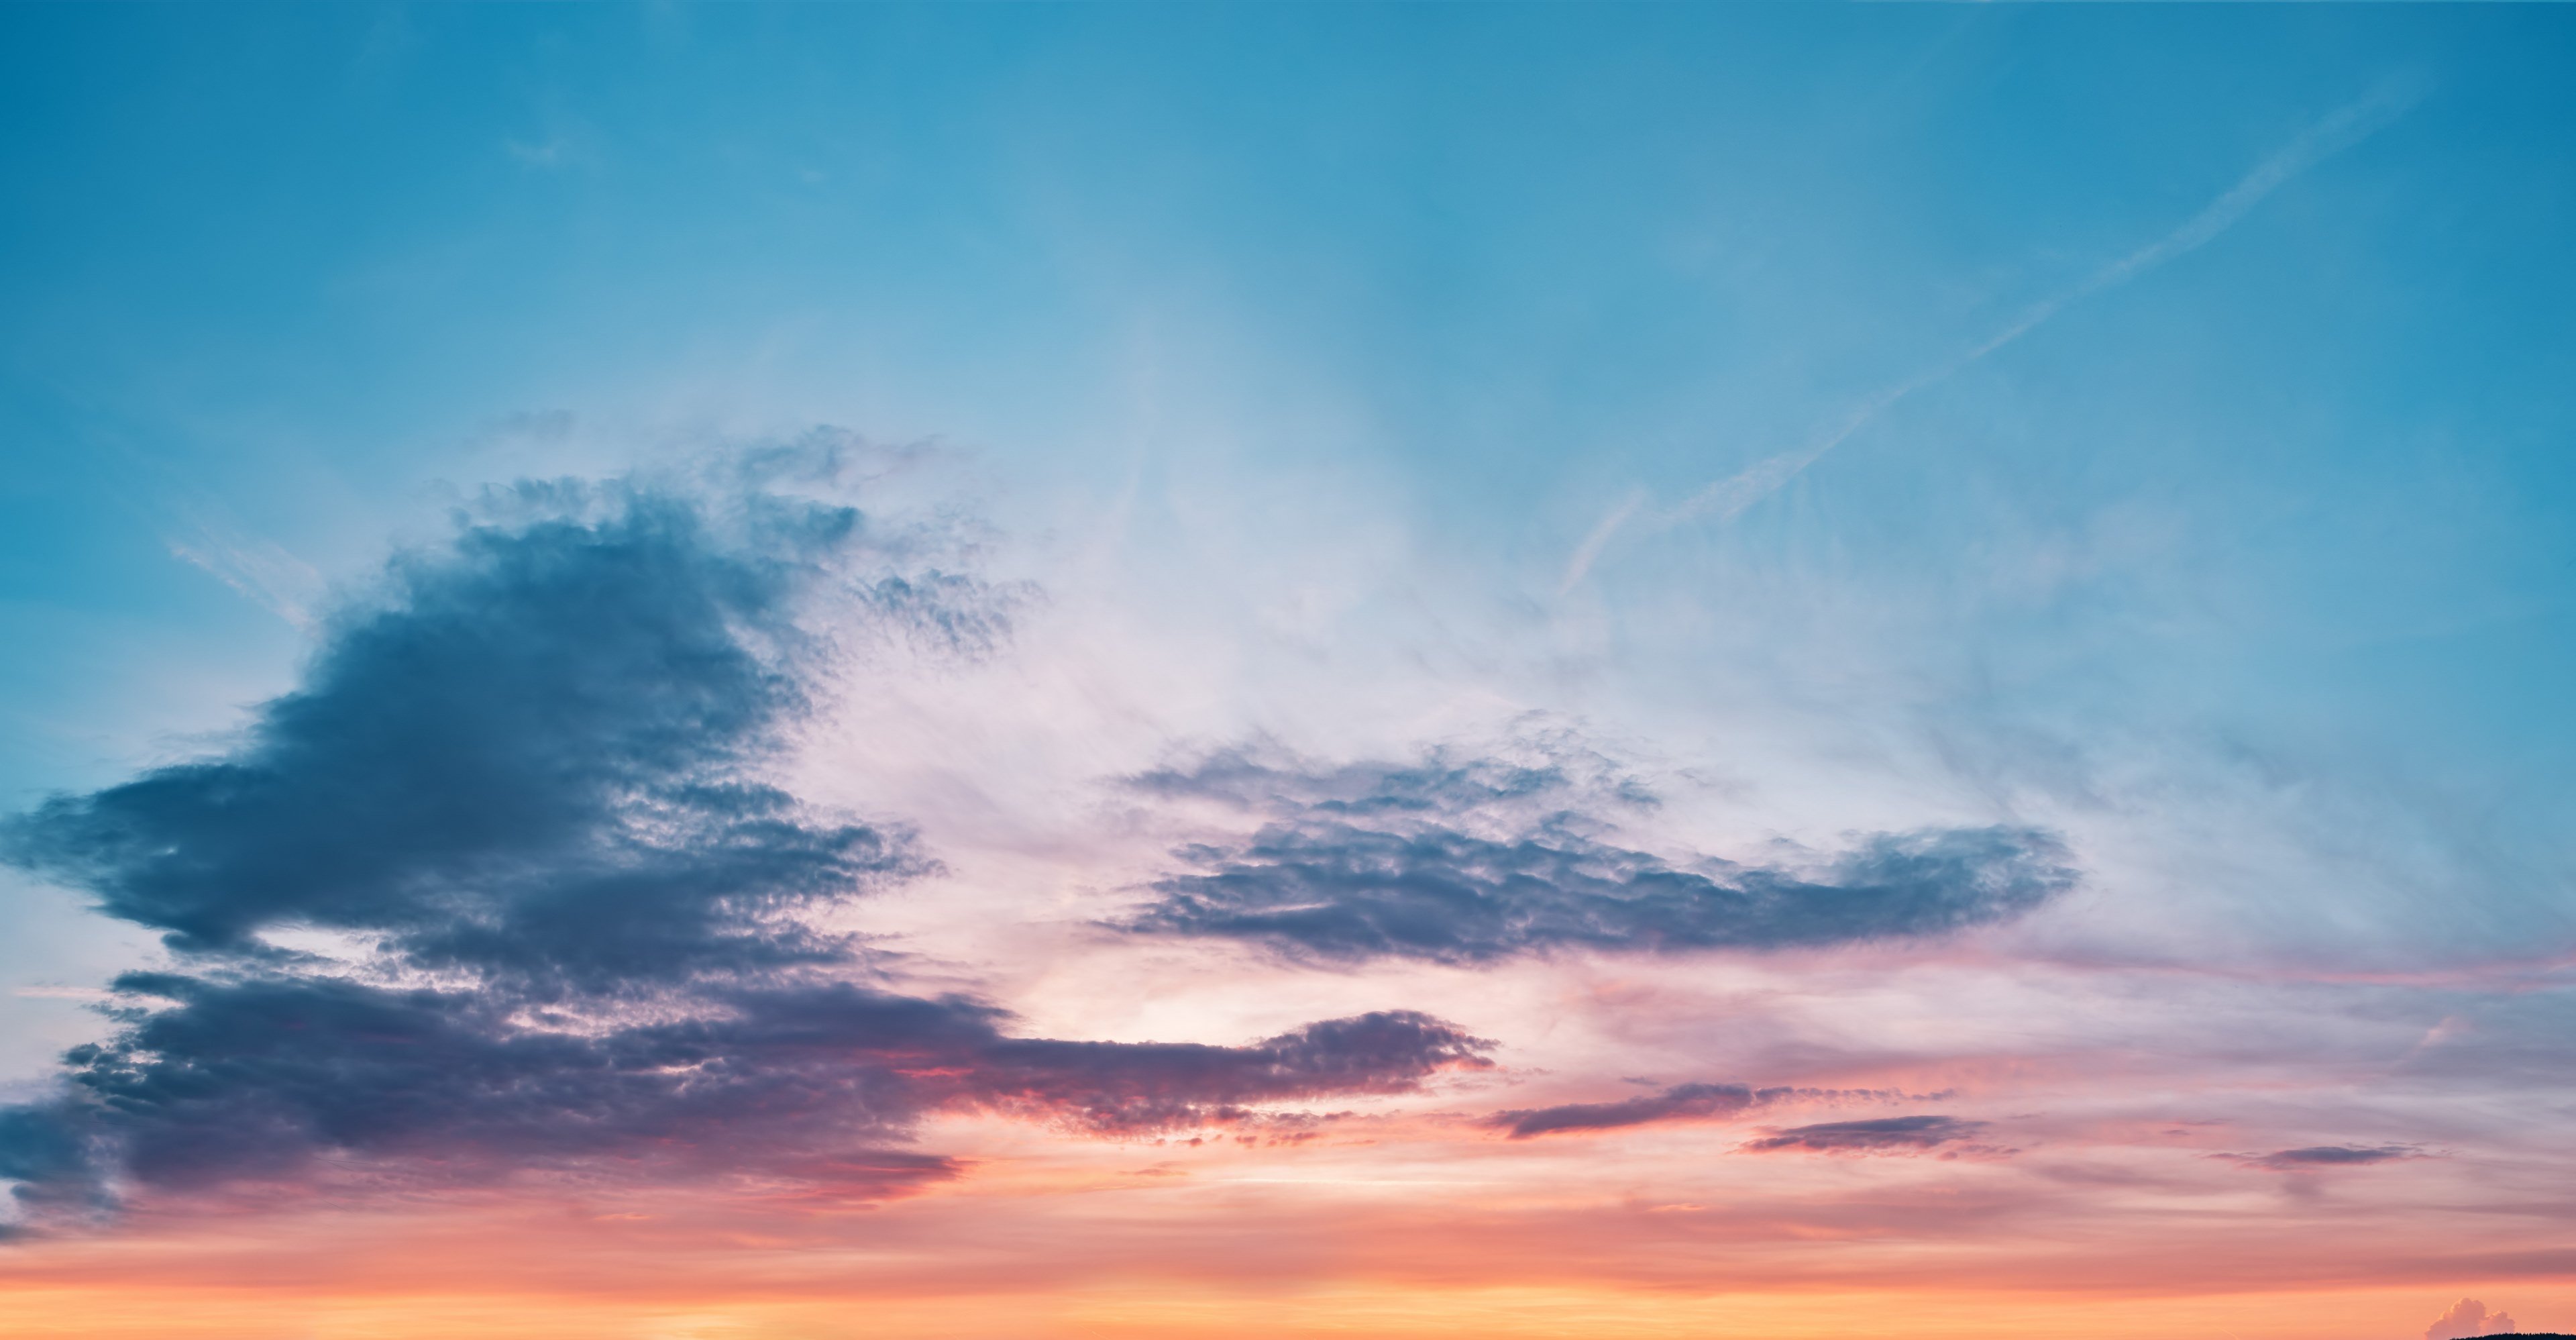 Wallpaper / blue pink and orange skyscape during sunset, skies and clouds 4k wallpaper free download